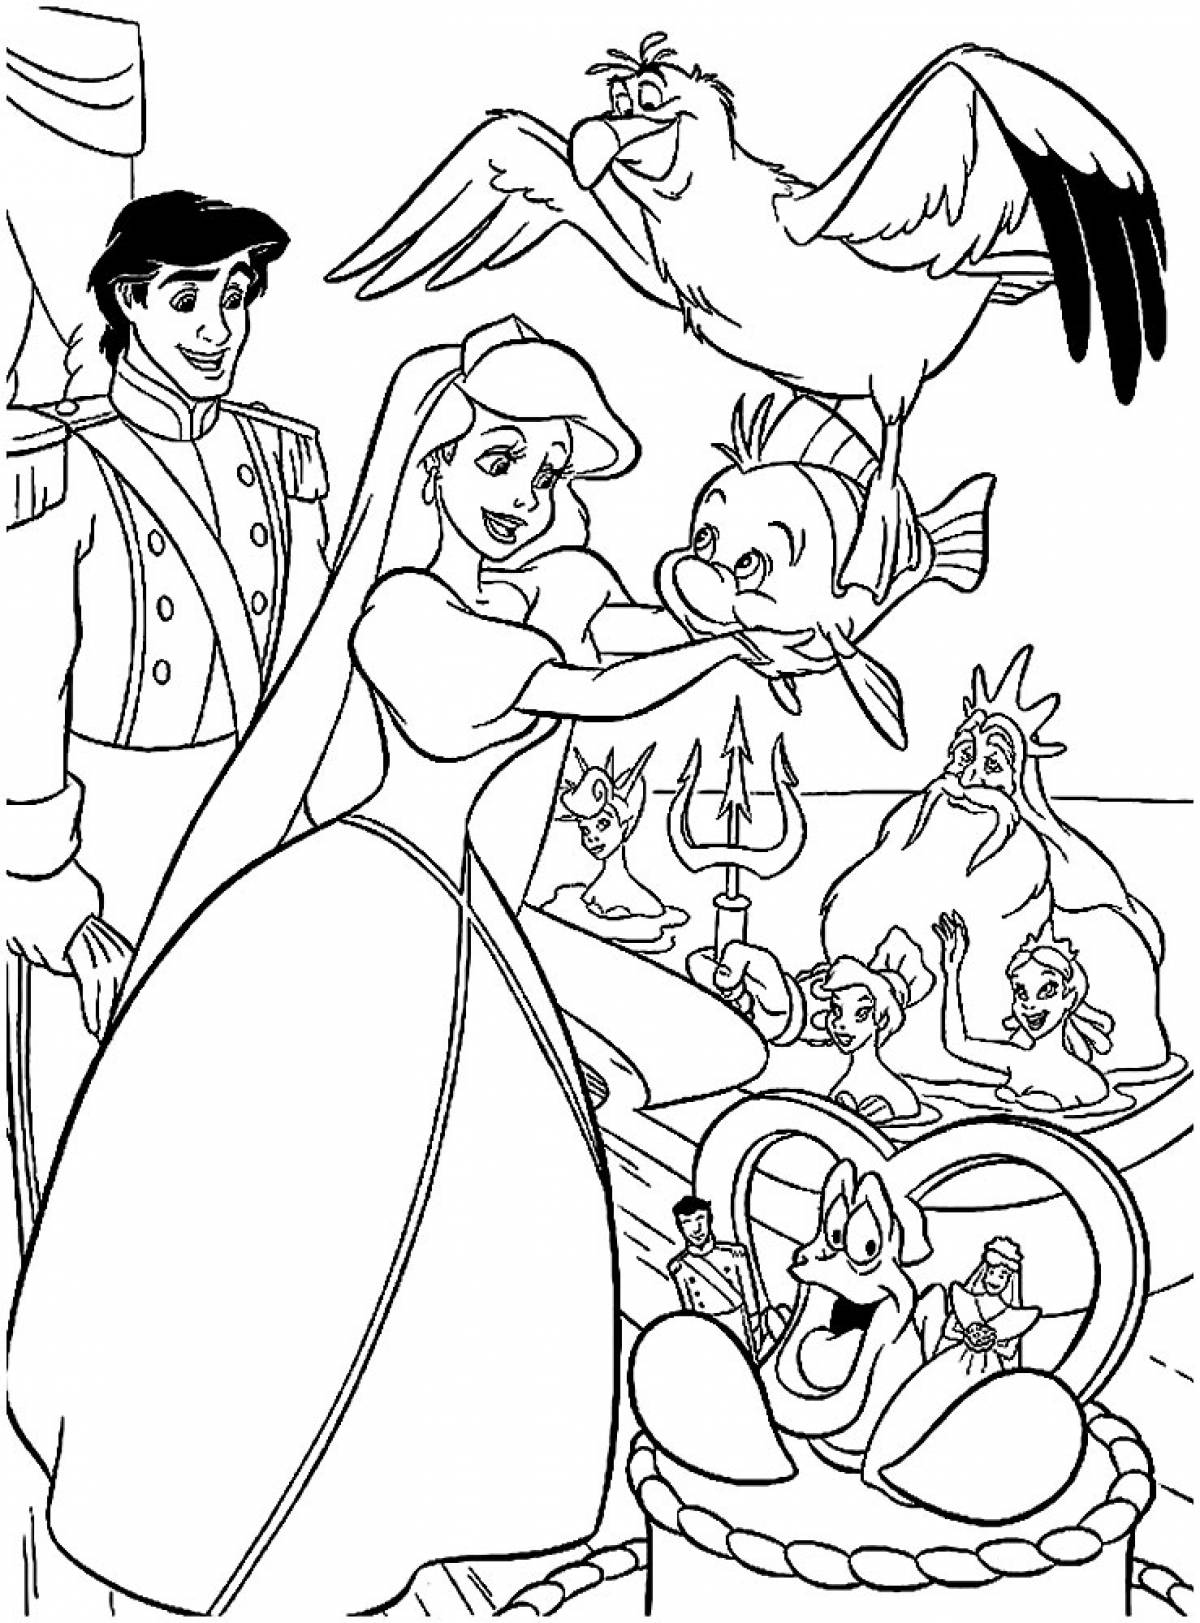 Prince and Ariel on the ship coloring